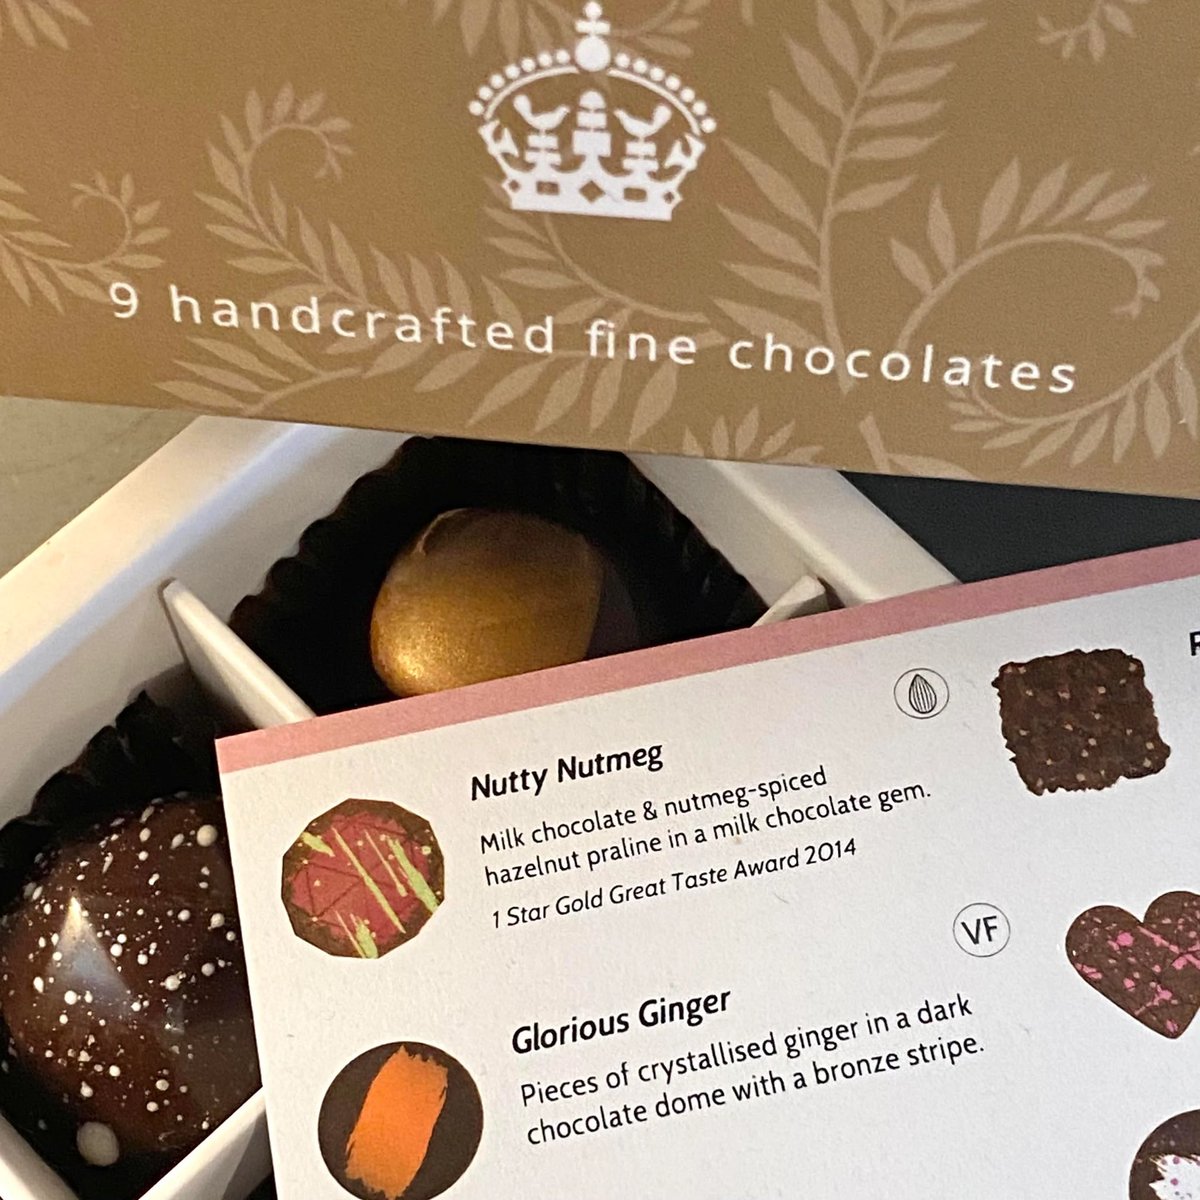 It seems that Highgrove is having a dig at Meg and Haz, or should I say, Nutty Nutmeg and Glorious Ginger. Thankfully, Nutty Nutmeg isn’t made with dark chocolate, else that might be considered racist.

#MeghanMarkIe
#MeghanMarkleIsAGrifter 
#MeghanAndHarryAreAJoke